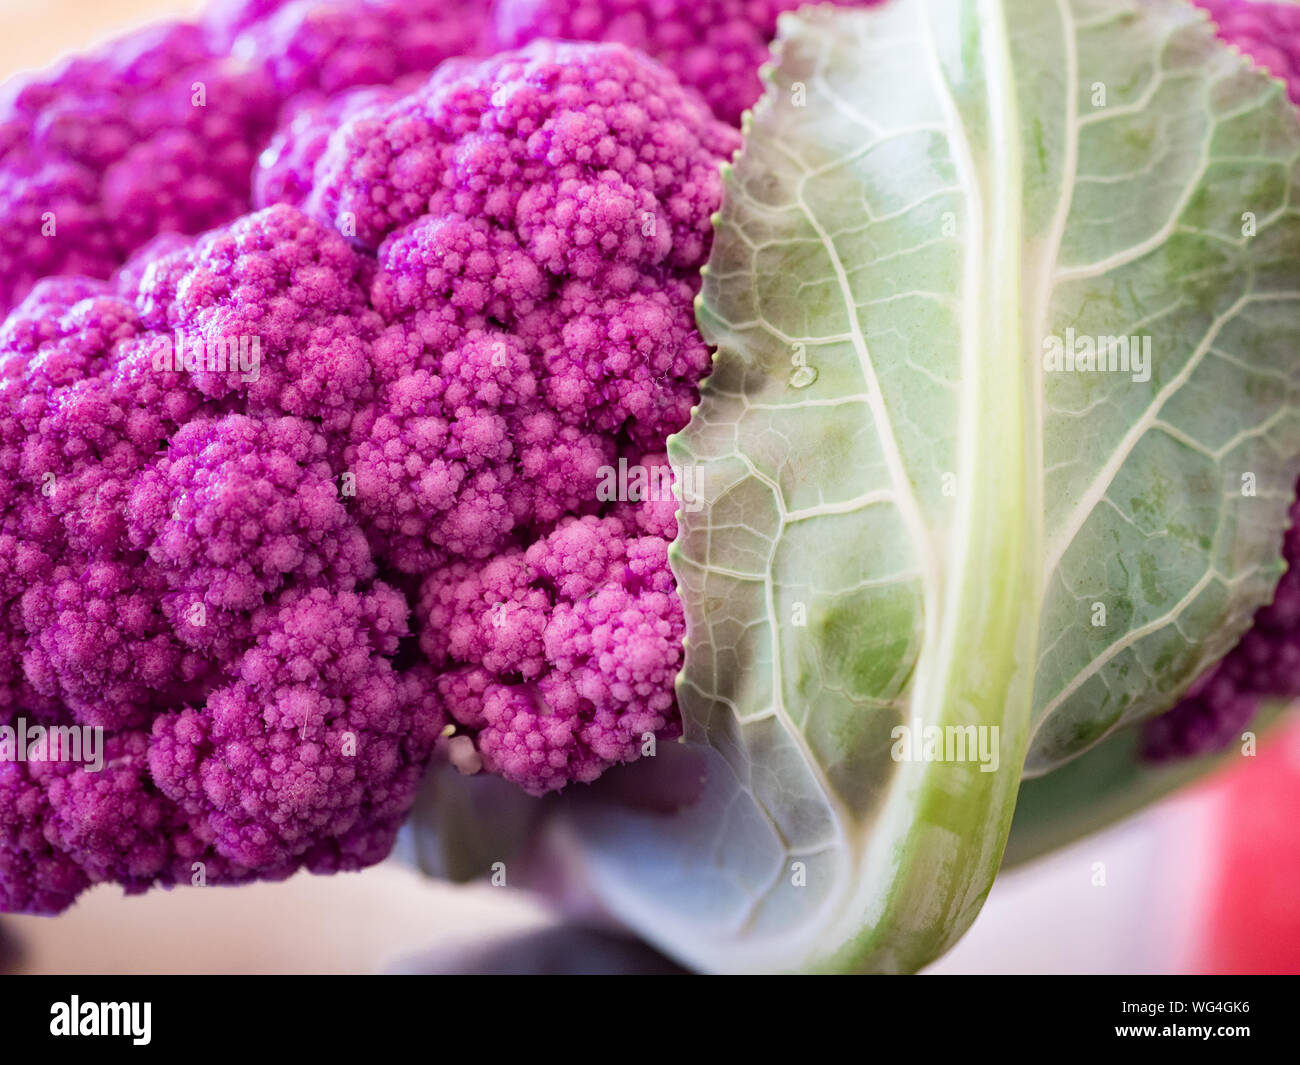 Close up view of organic purple cauliflower from farmer's market, Brassica oleracea var. botrytis, belonging to the plant order Capparales, gets color Stock Photo